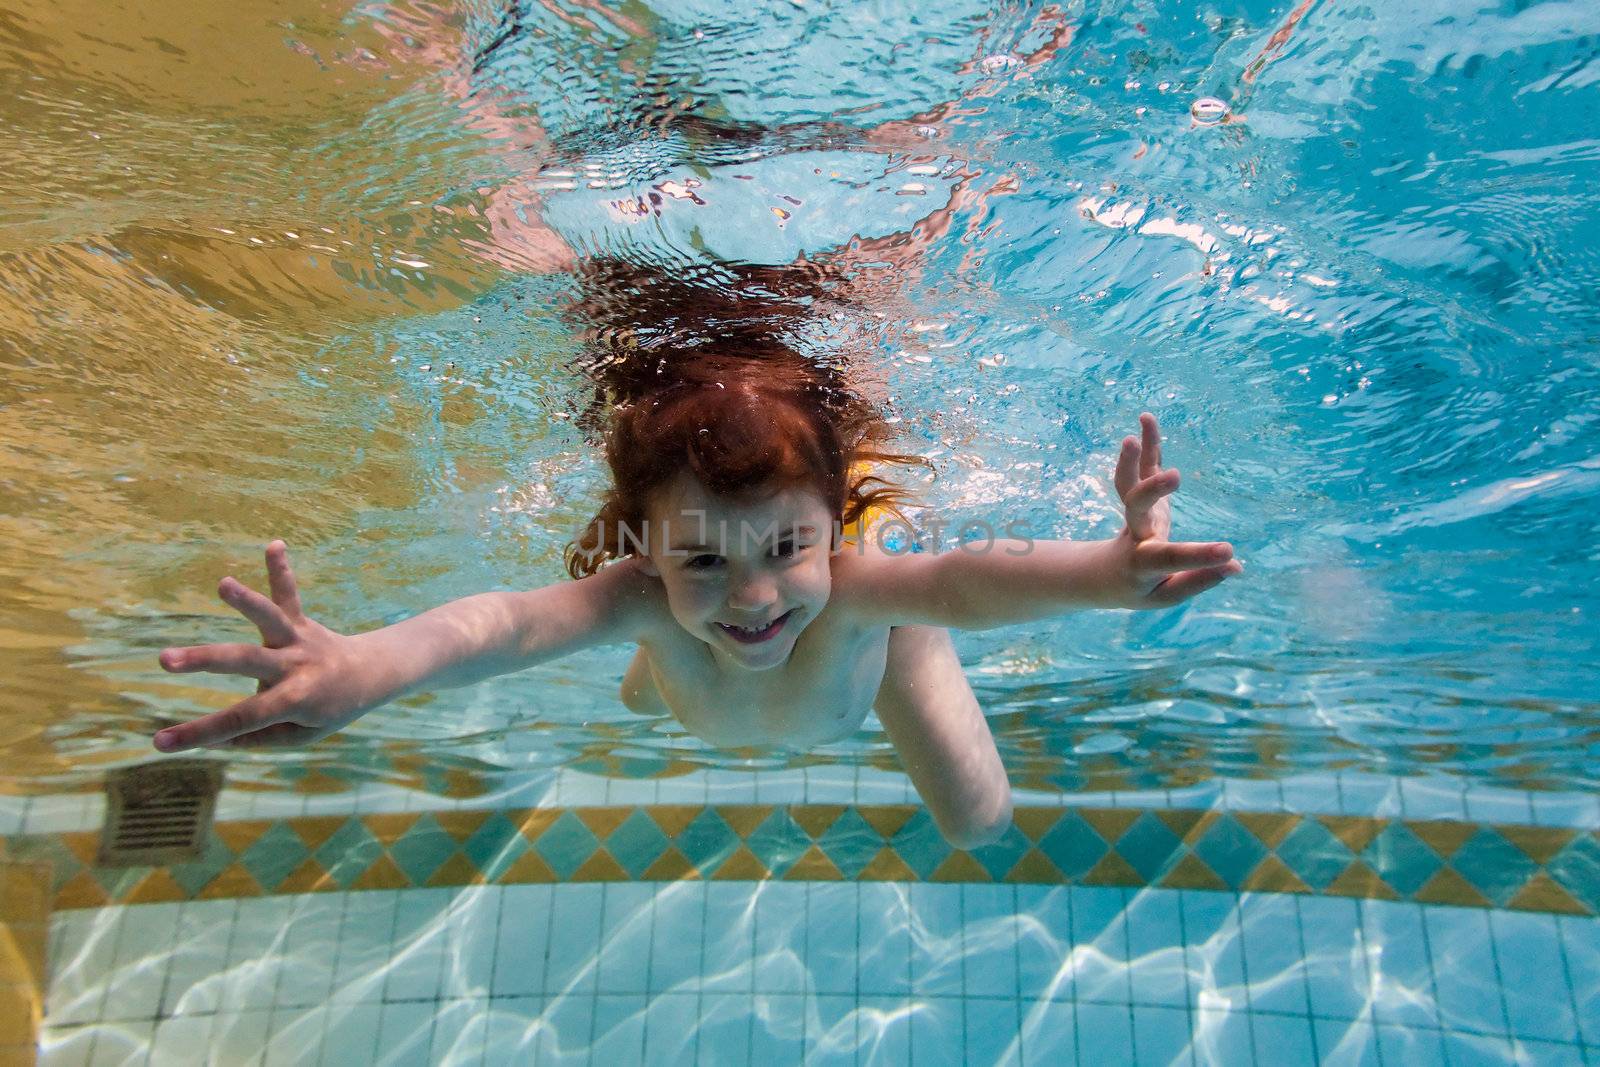 The girl smiles, swimming under water in the pool by Antartis